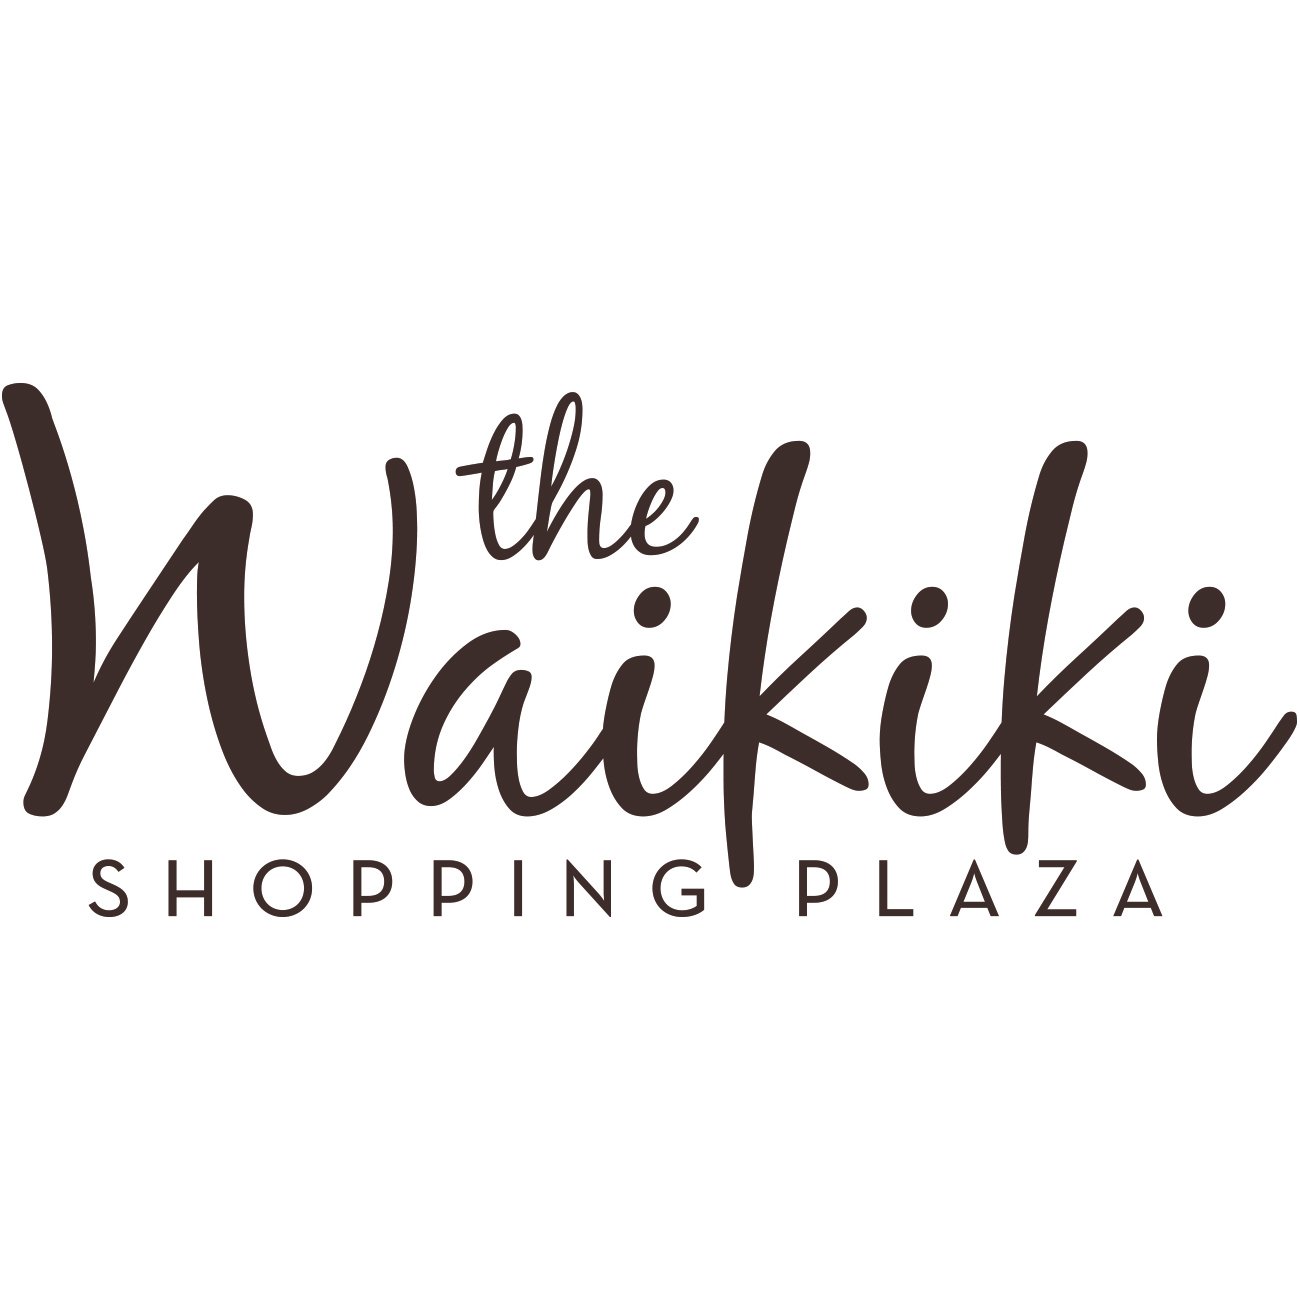 Shopping and dining on the famous corners of Kalakaua Ave and Seaside Ave. | SHOP, DINE, LOVE WAIKIKI